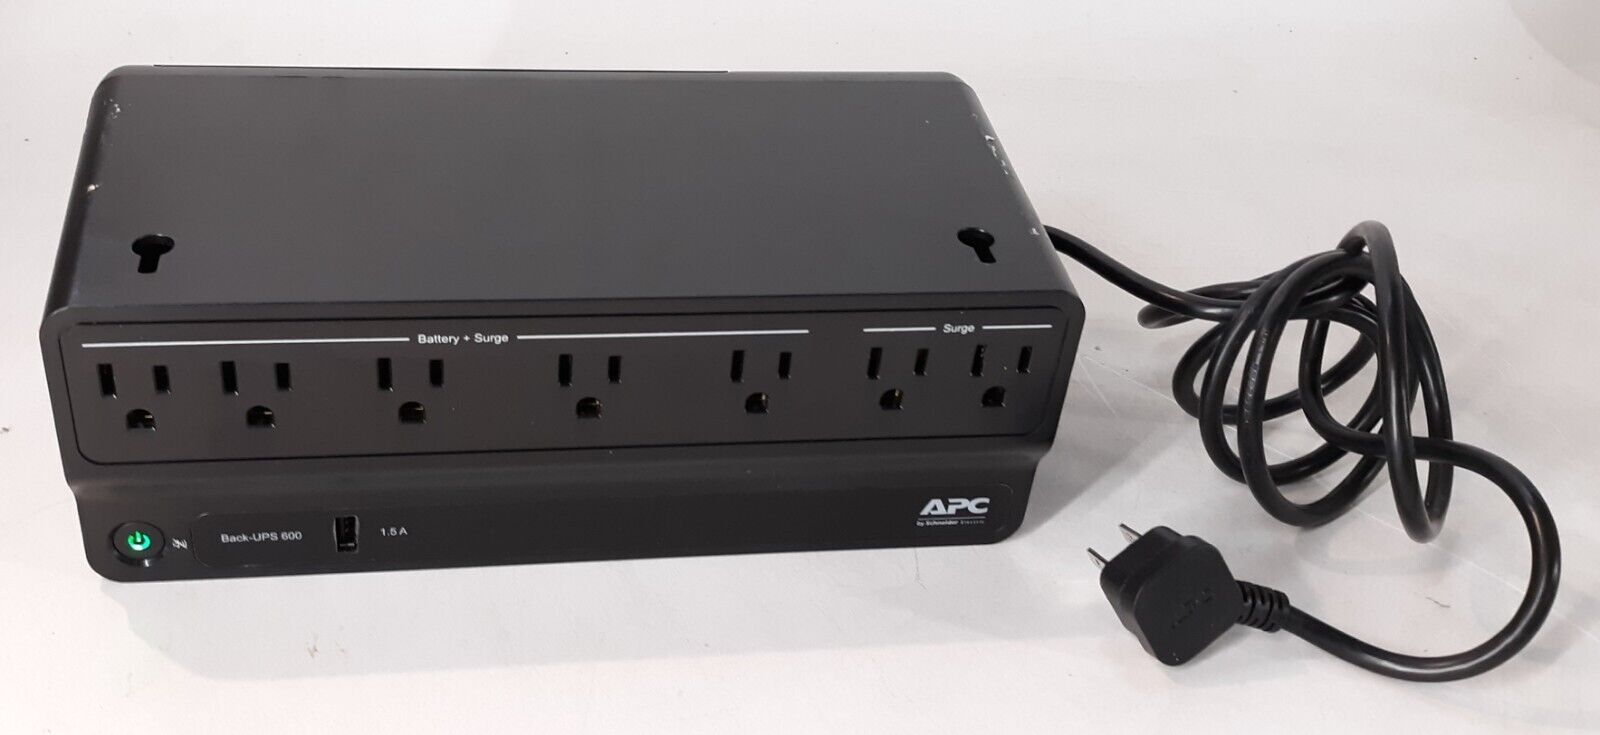 APC Back-UPS 600 BE600M1 120V-12A 50/60GHz 330W Battery Power Supply *TESTED*